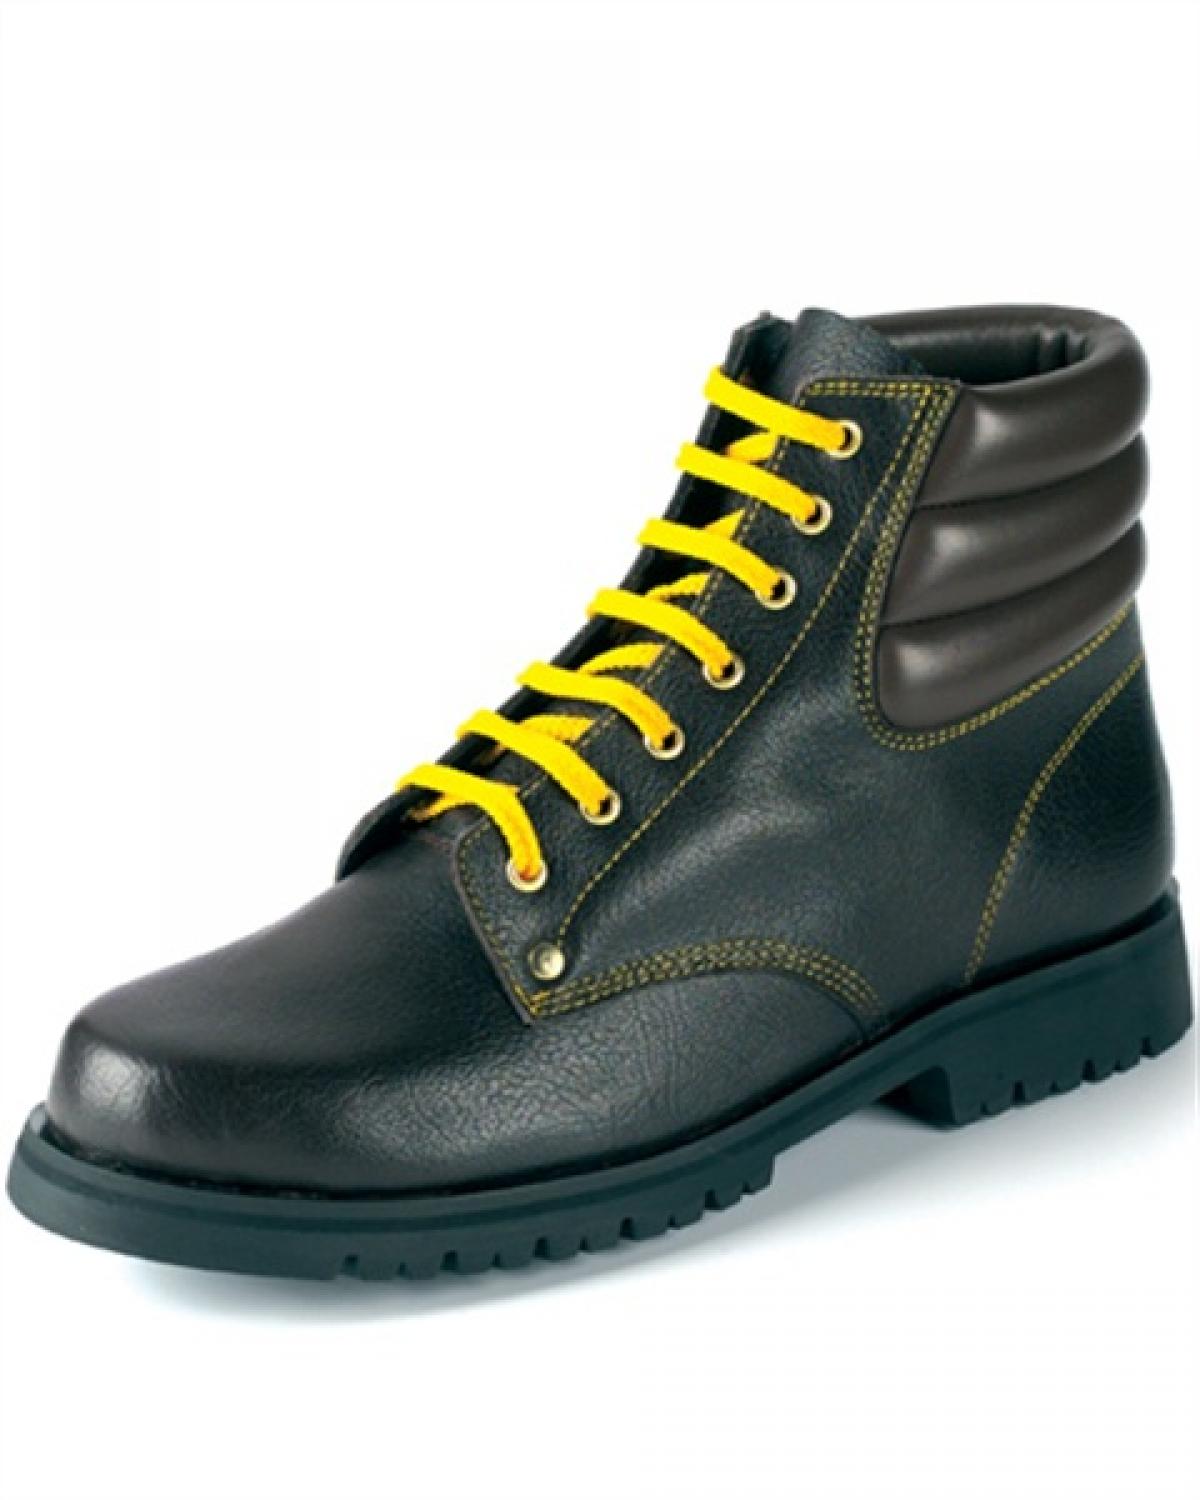 boots yellow laces